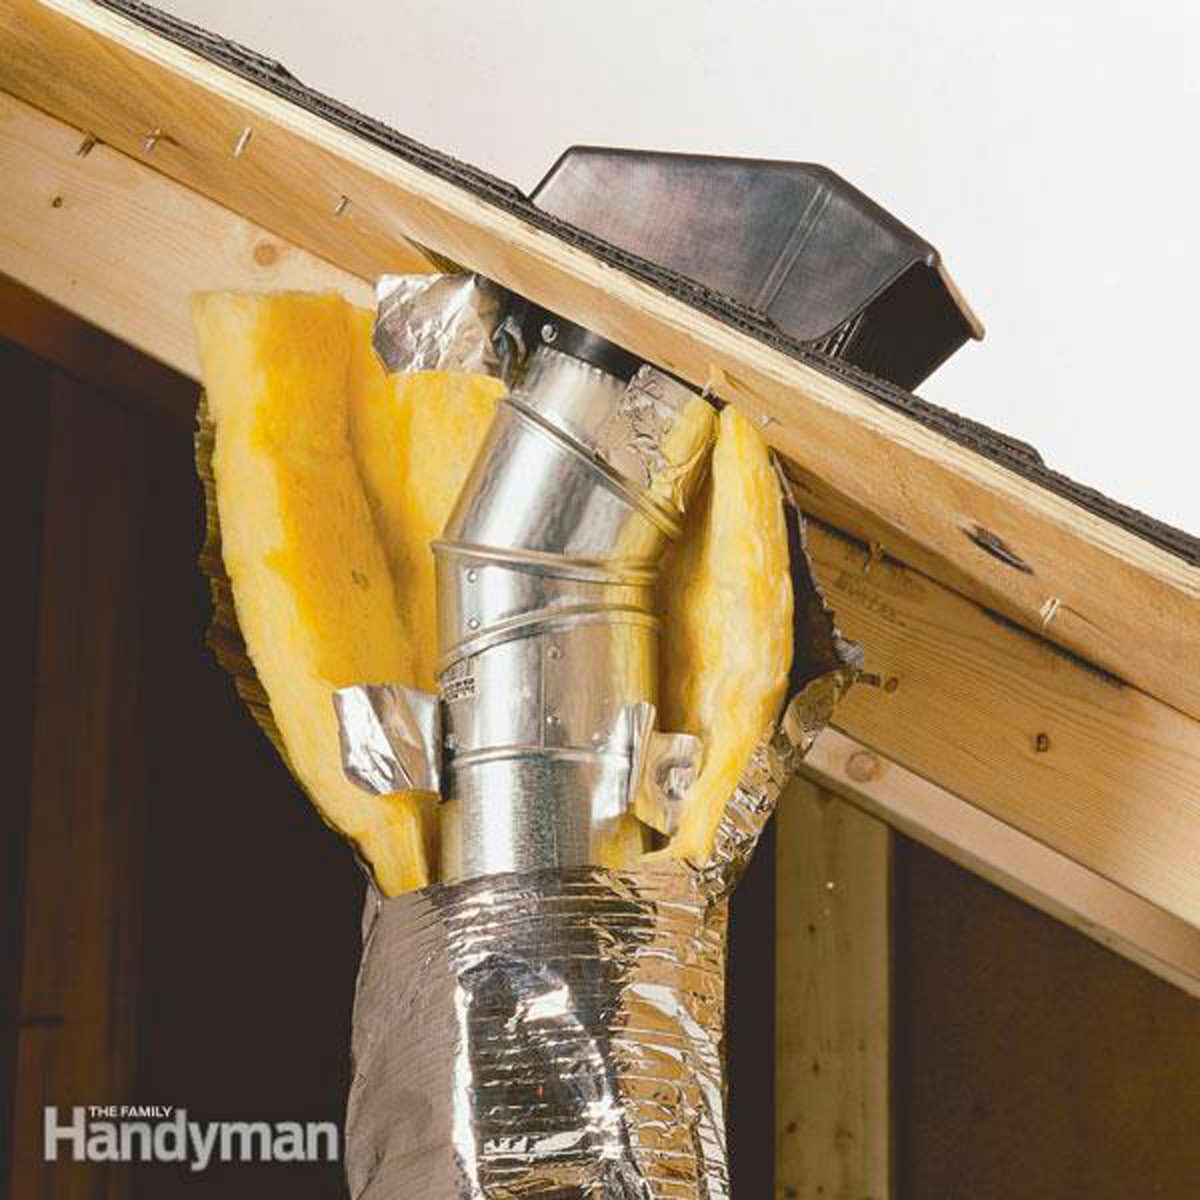 Venting Exhaust Fans Through The Roof Diy Family Handyman - How To Vent A Bathroom Exhaust Fan Soffitto